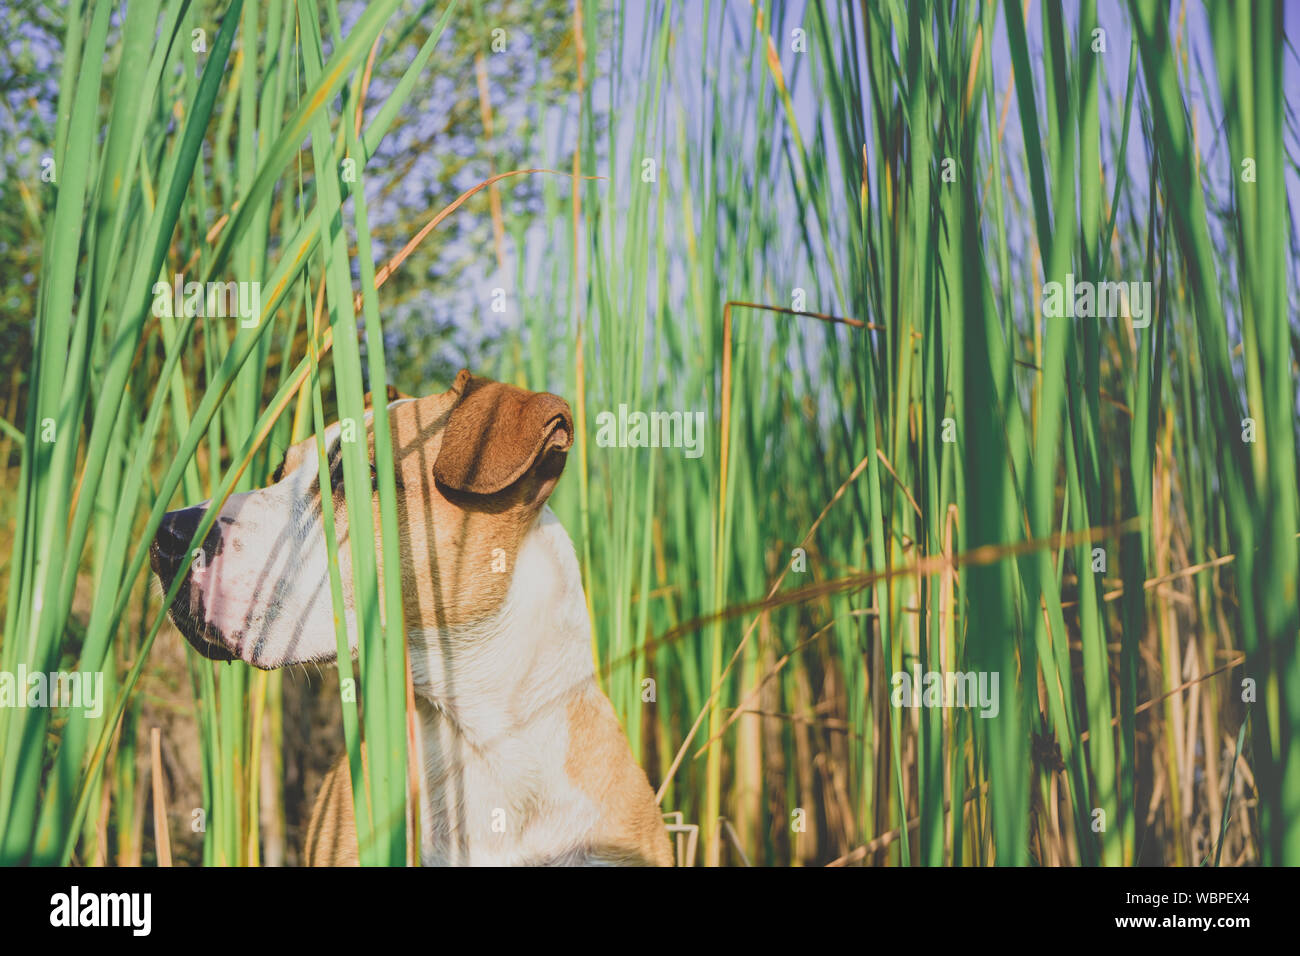 Dog in tall green grass, hidden eyes. Funny dog pretends to hide behind grasses in beautiful summer nature, peek-a-boo concept Stock Photo